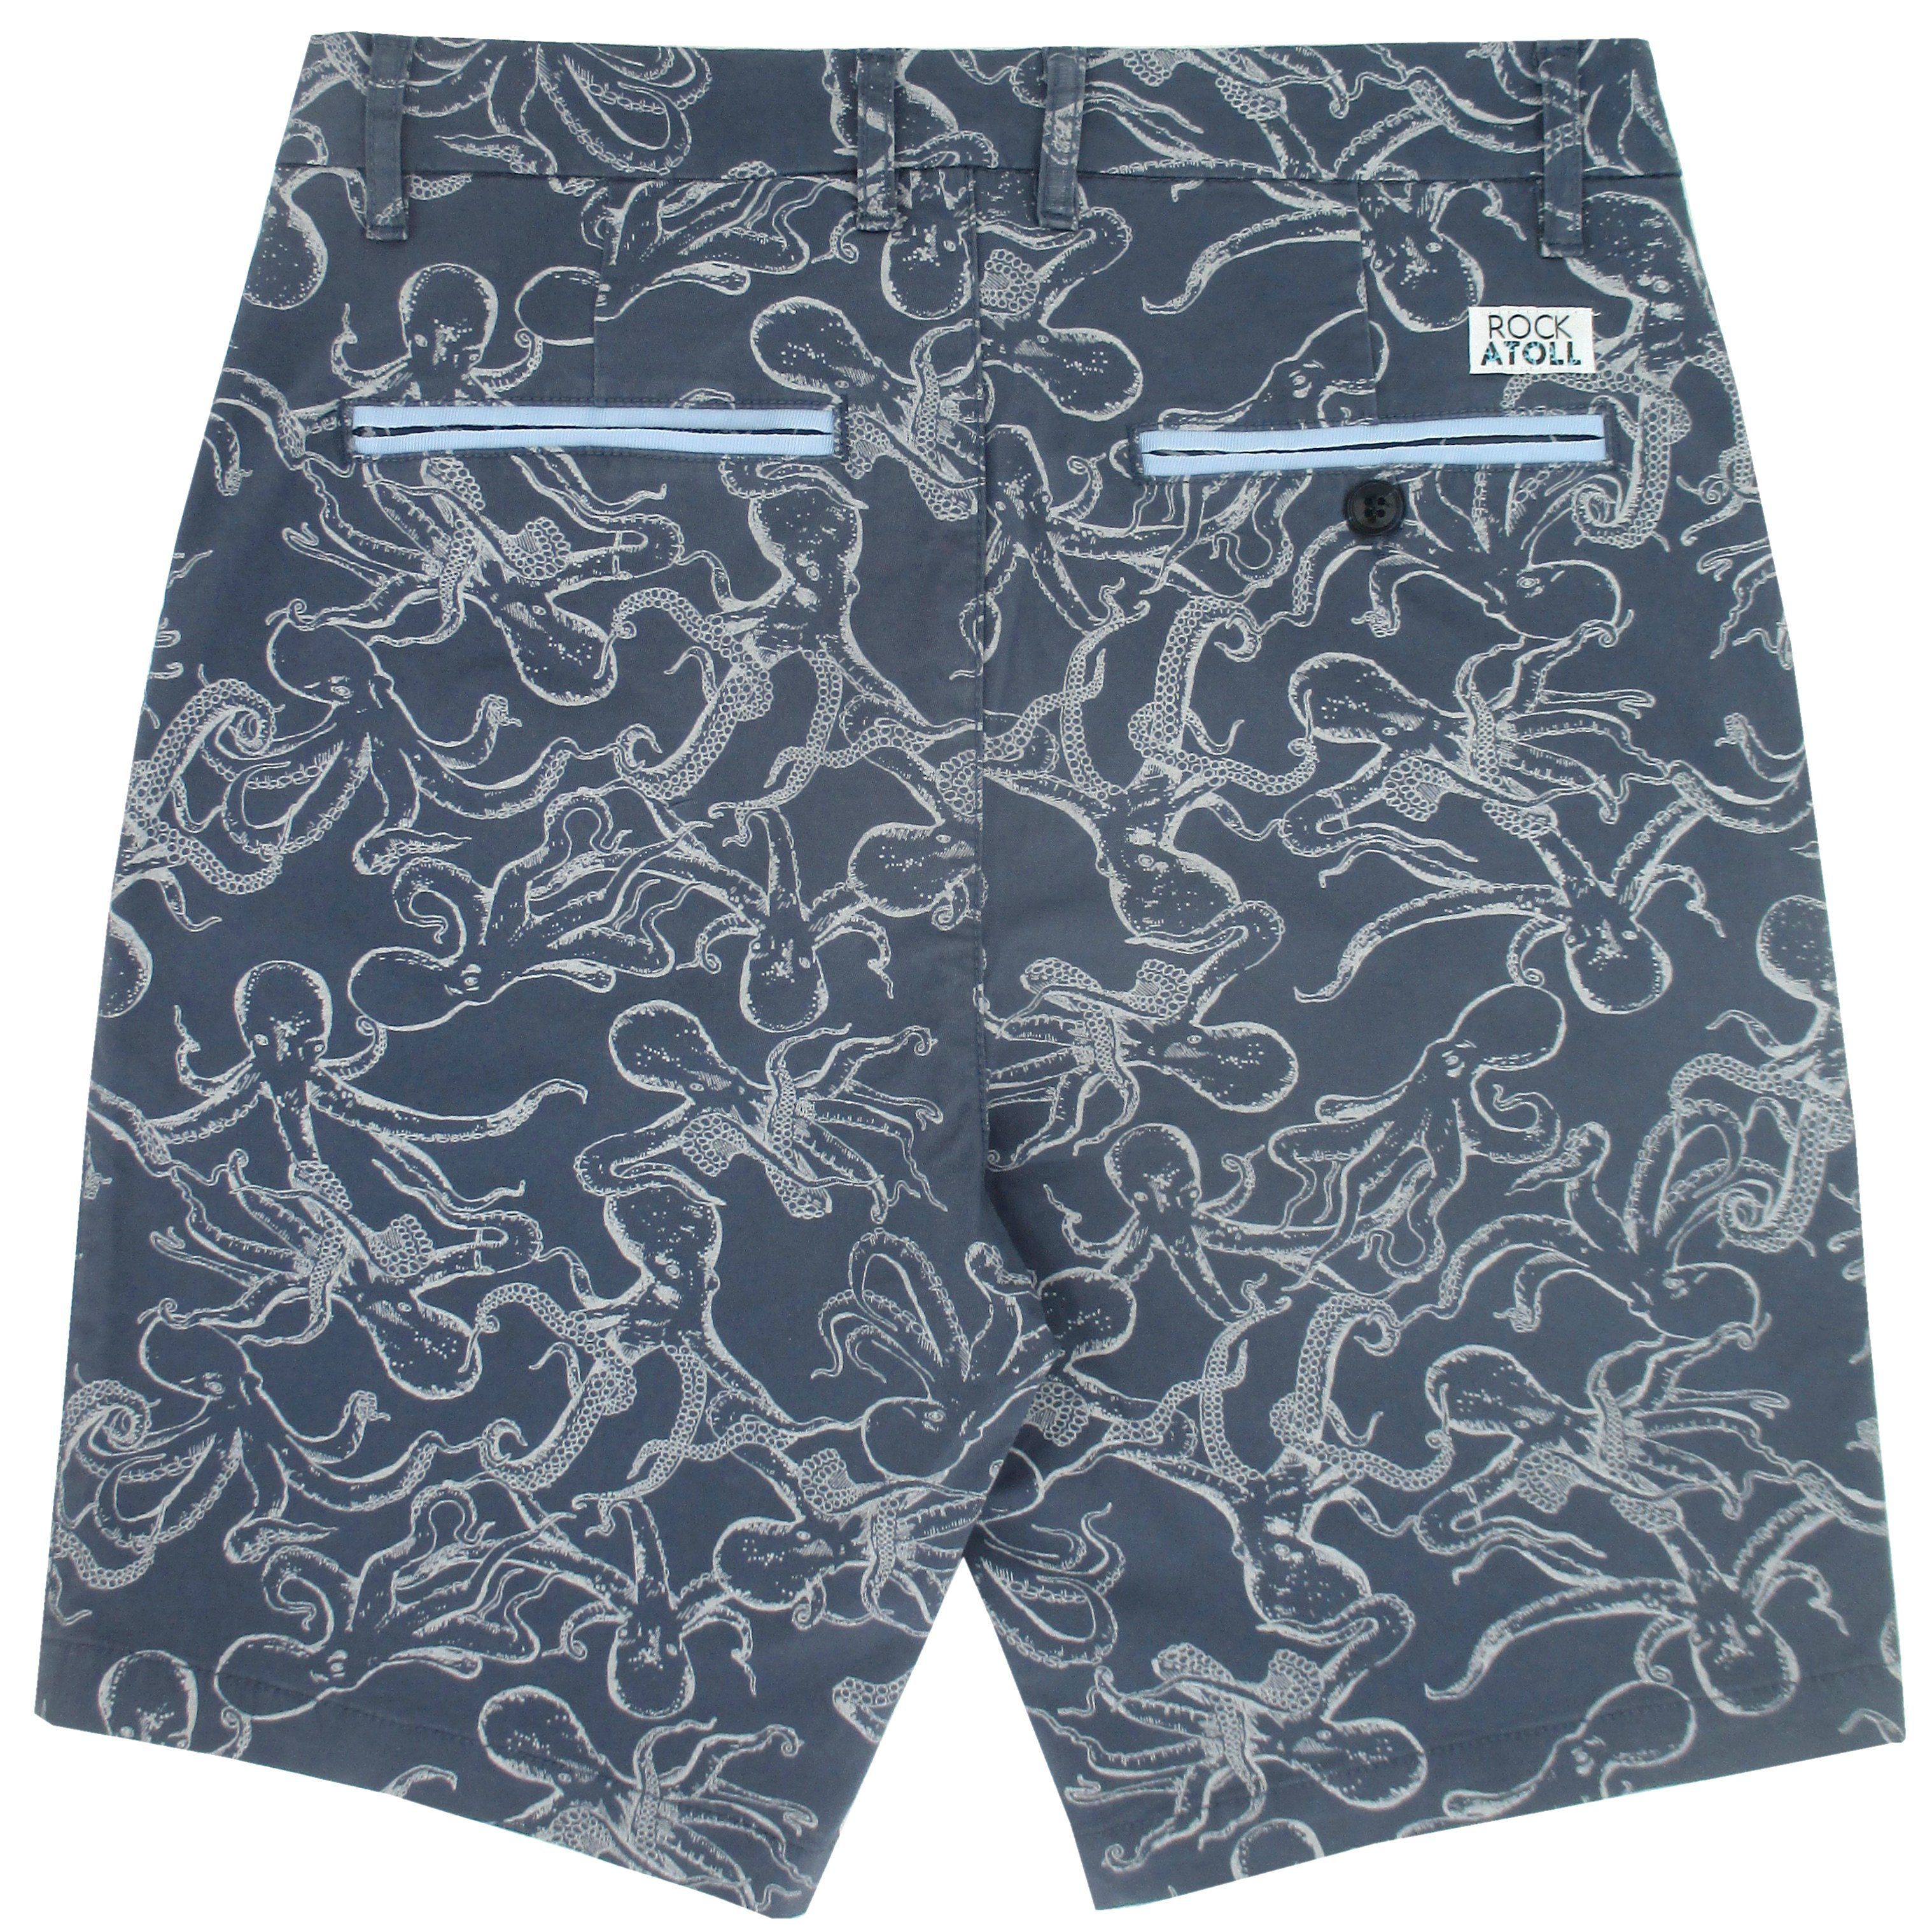 Rock Atoll Bold Octopus Patterned Flat Front Shorts for Men